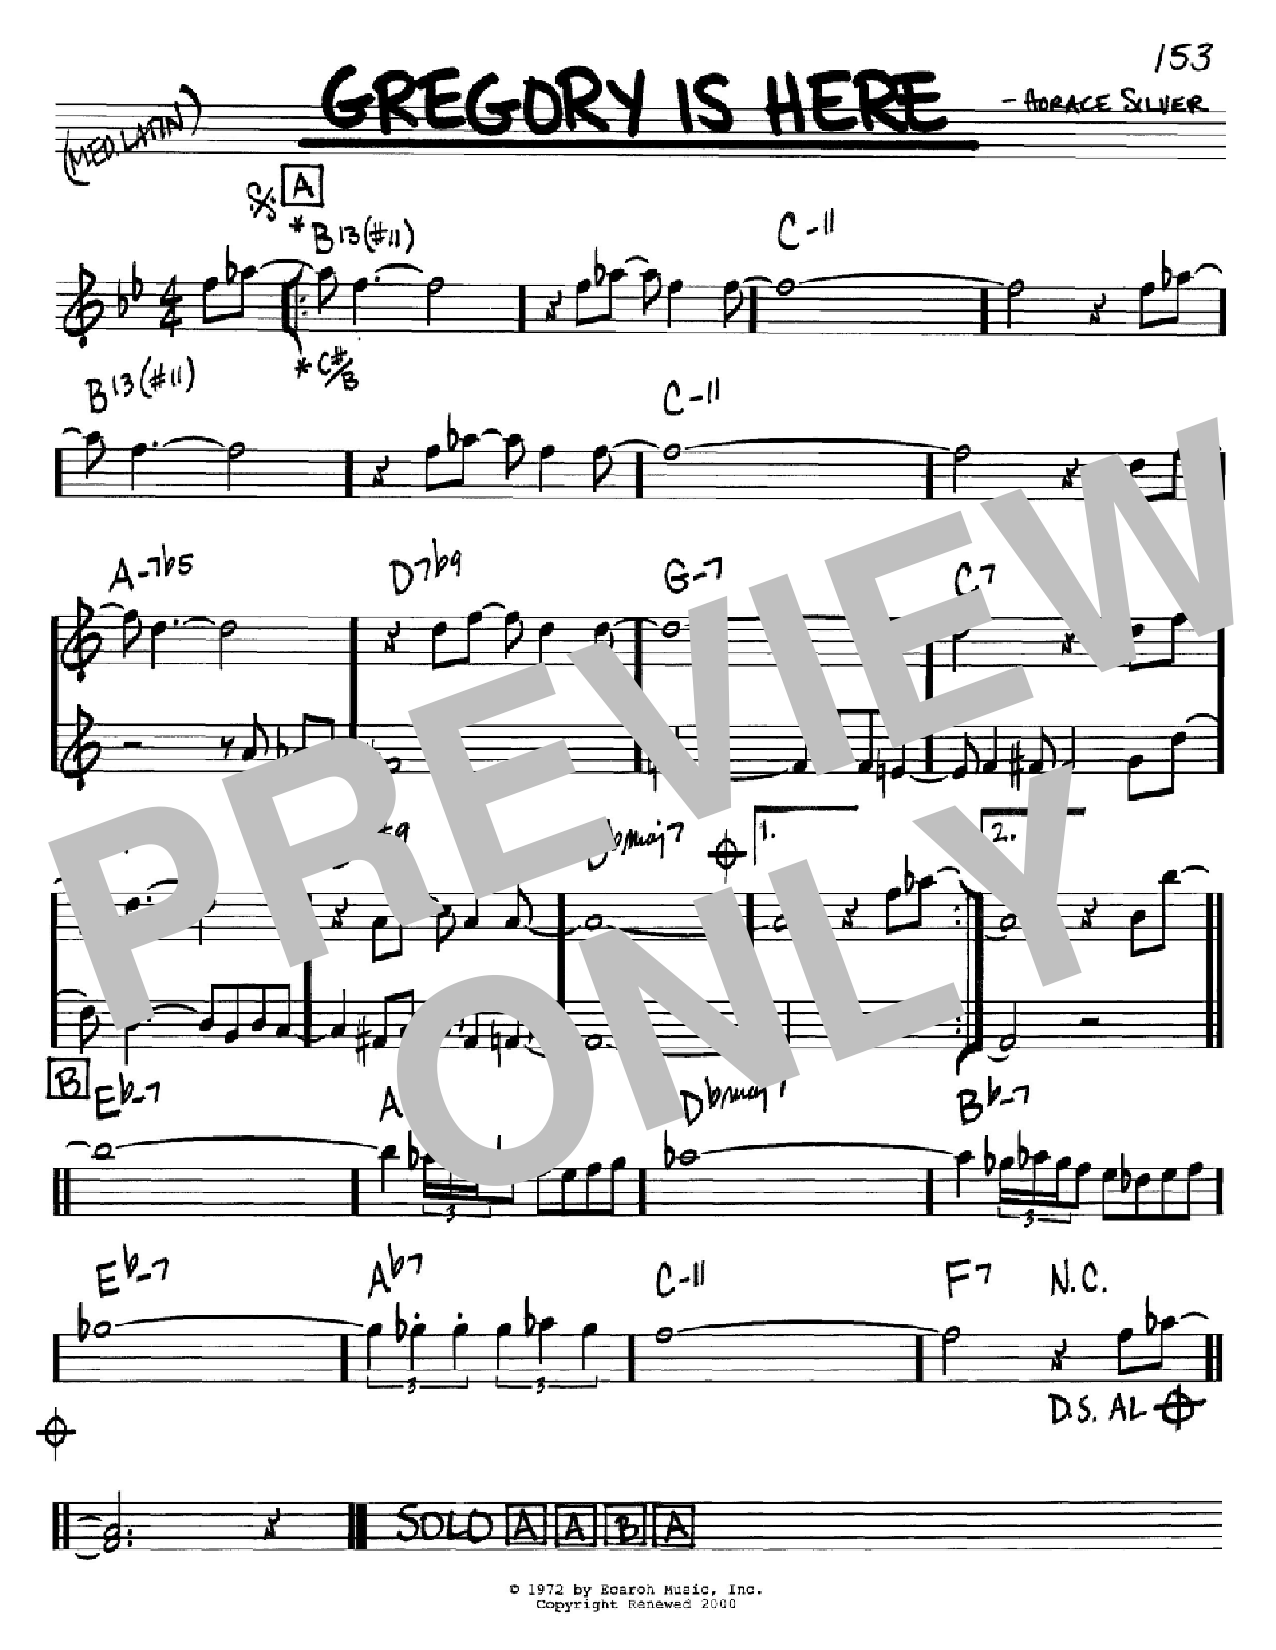 Download Horace Silver Gregory Is Here Sheet Music